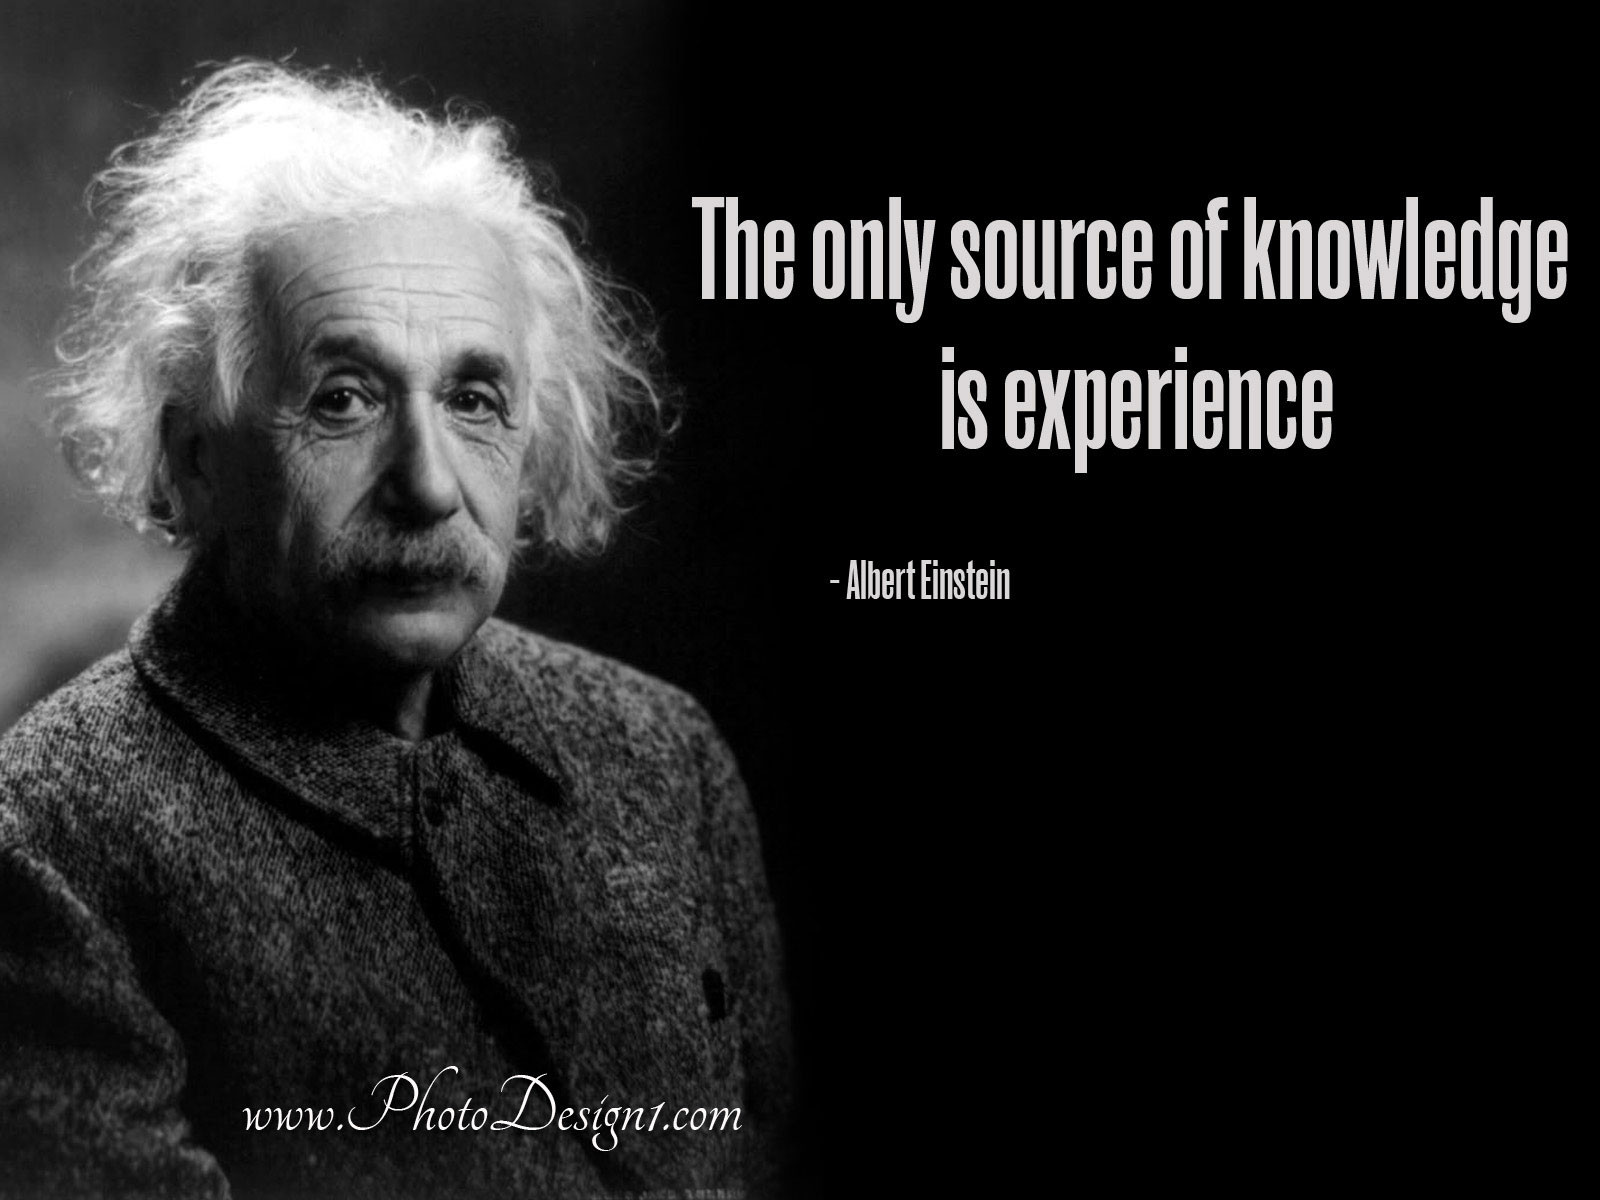 Albert Einstein Educational Quotes
 115 Best Motivational Wallpaper Examples with Inspiring Quotes